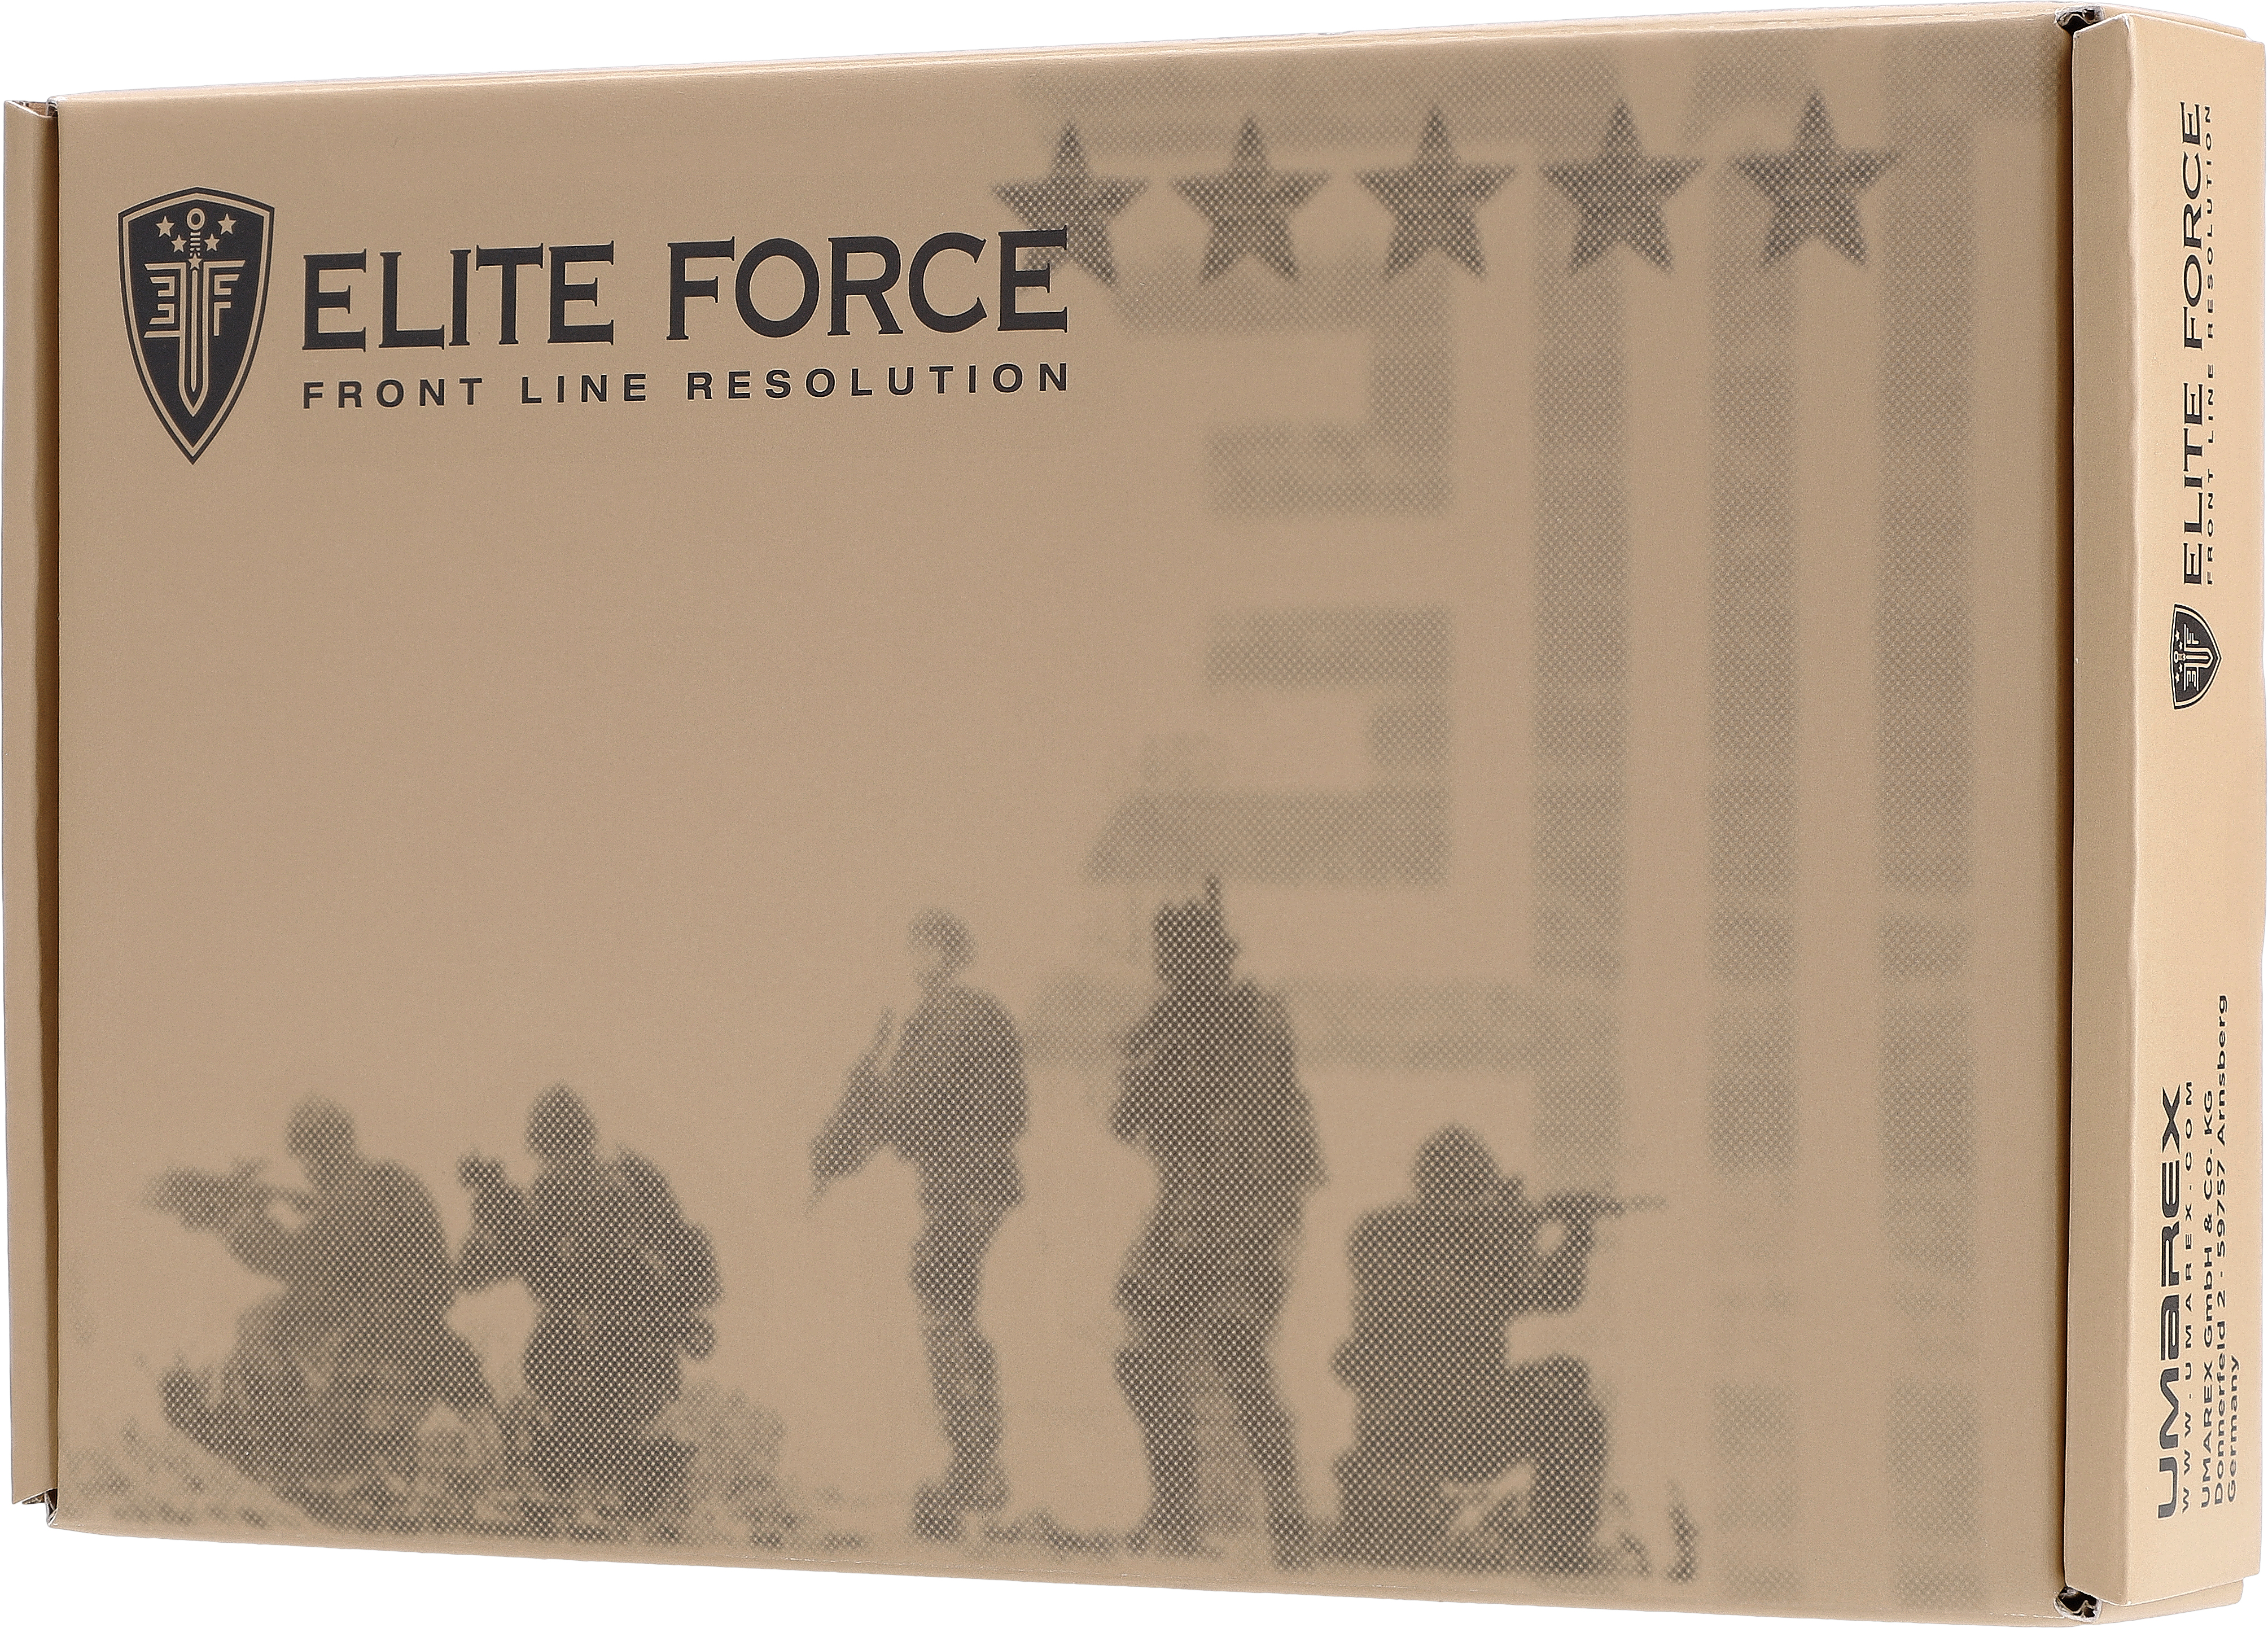 ELITE FORCE (Umarex) Airsoft GBB1911 Tac Two